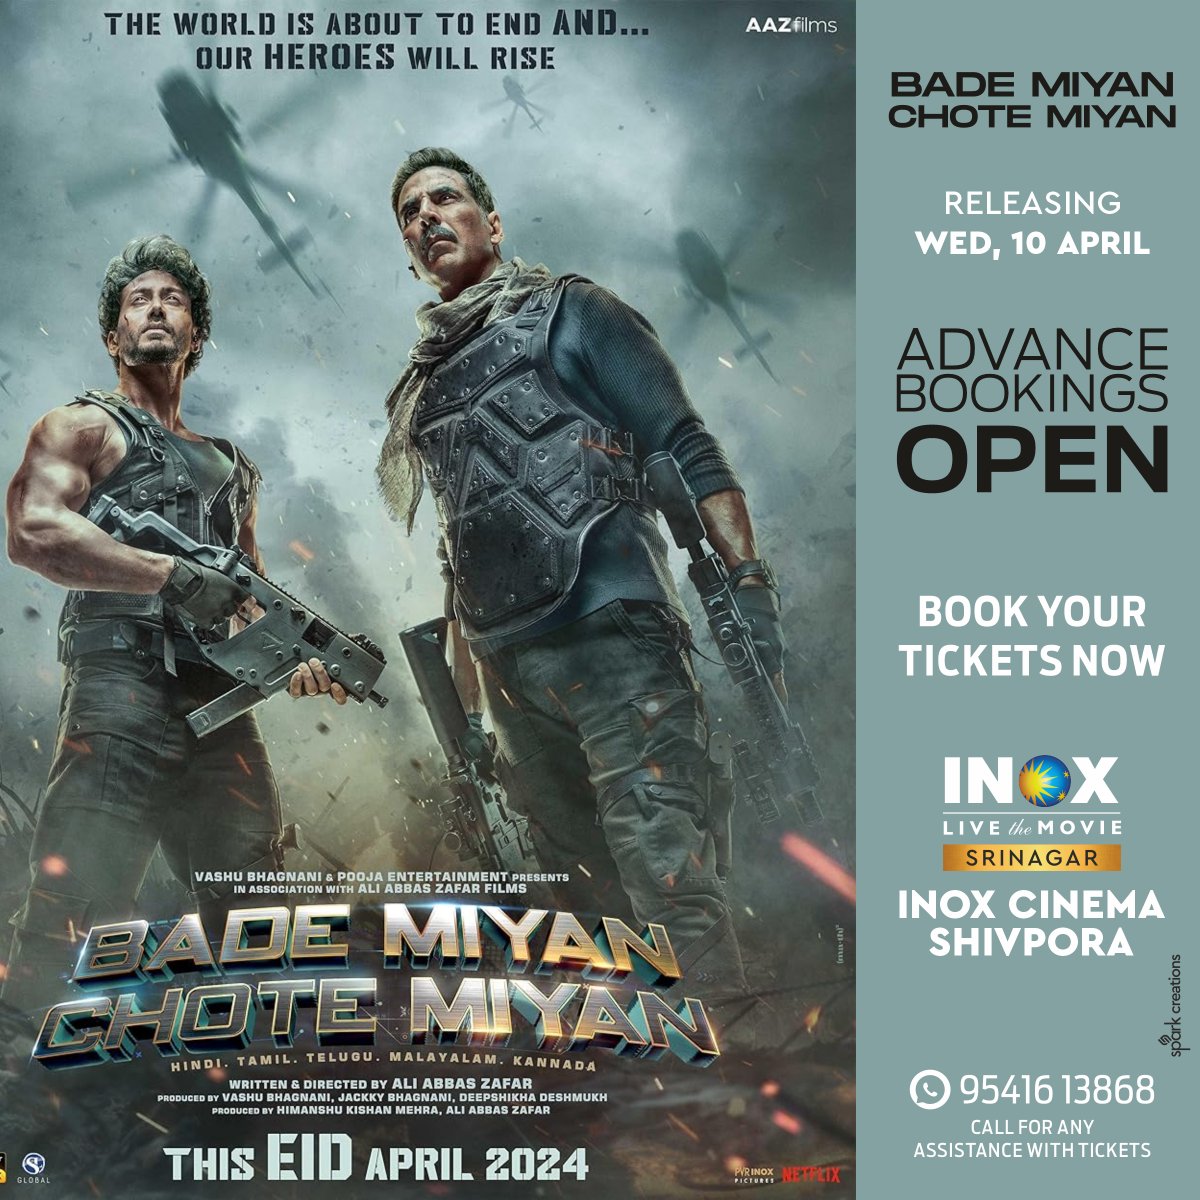 You are this close to experiencing REAL ACTION in theaters! 🤜🤛
#BadeMiyanChoteMiyan advance booking are open.

Experience it in CINEMAS ON 10th APRIL!

#BadeMiyanChoteMiyanOnApril10 #BadeMiyanChoteMiyanOnEid2024 #inoxsrinagar #srinagar #kashmir #inox #movies #cinema #bollywood